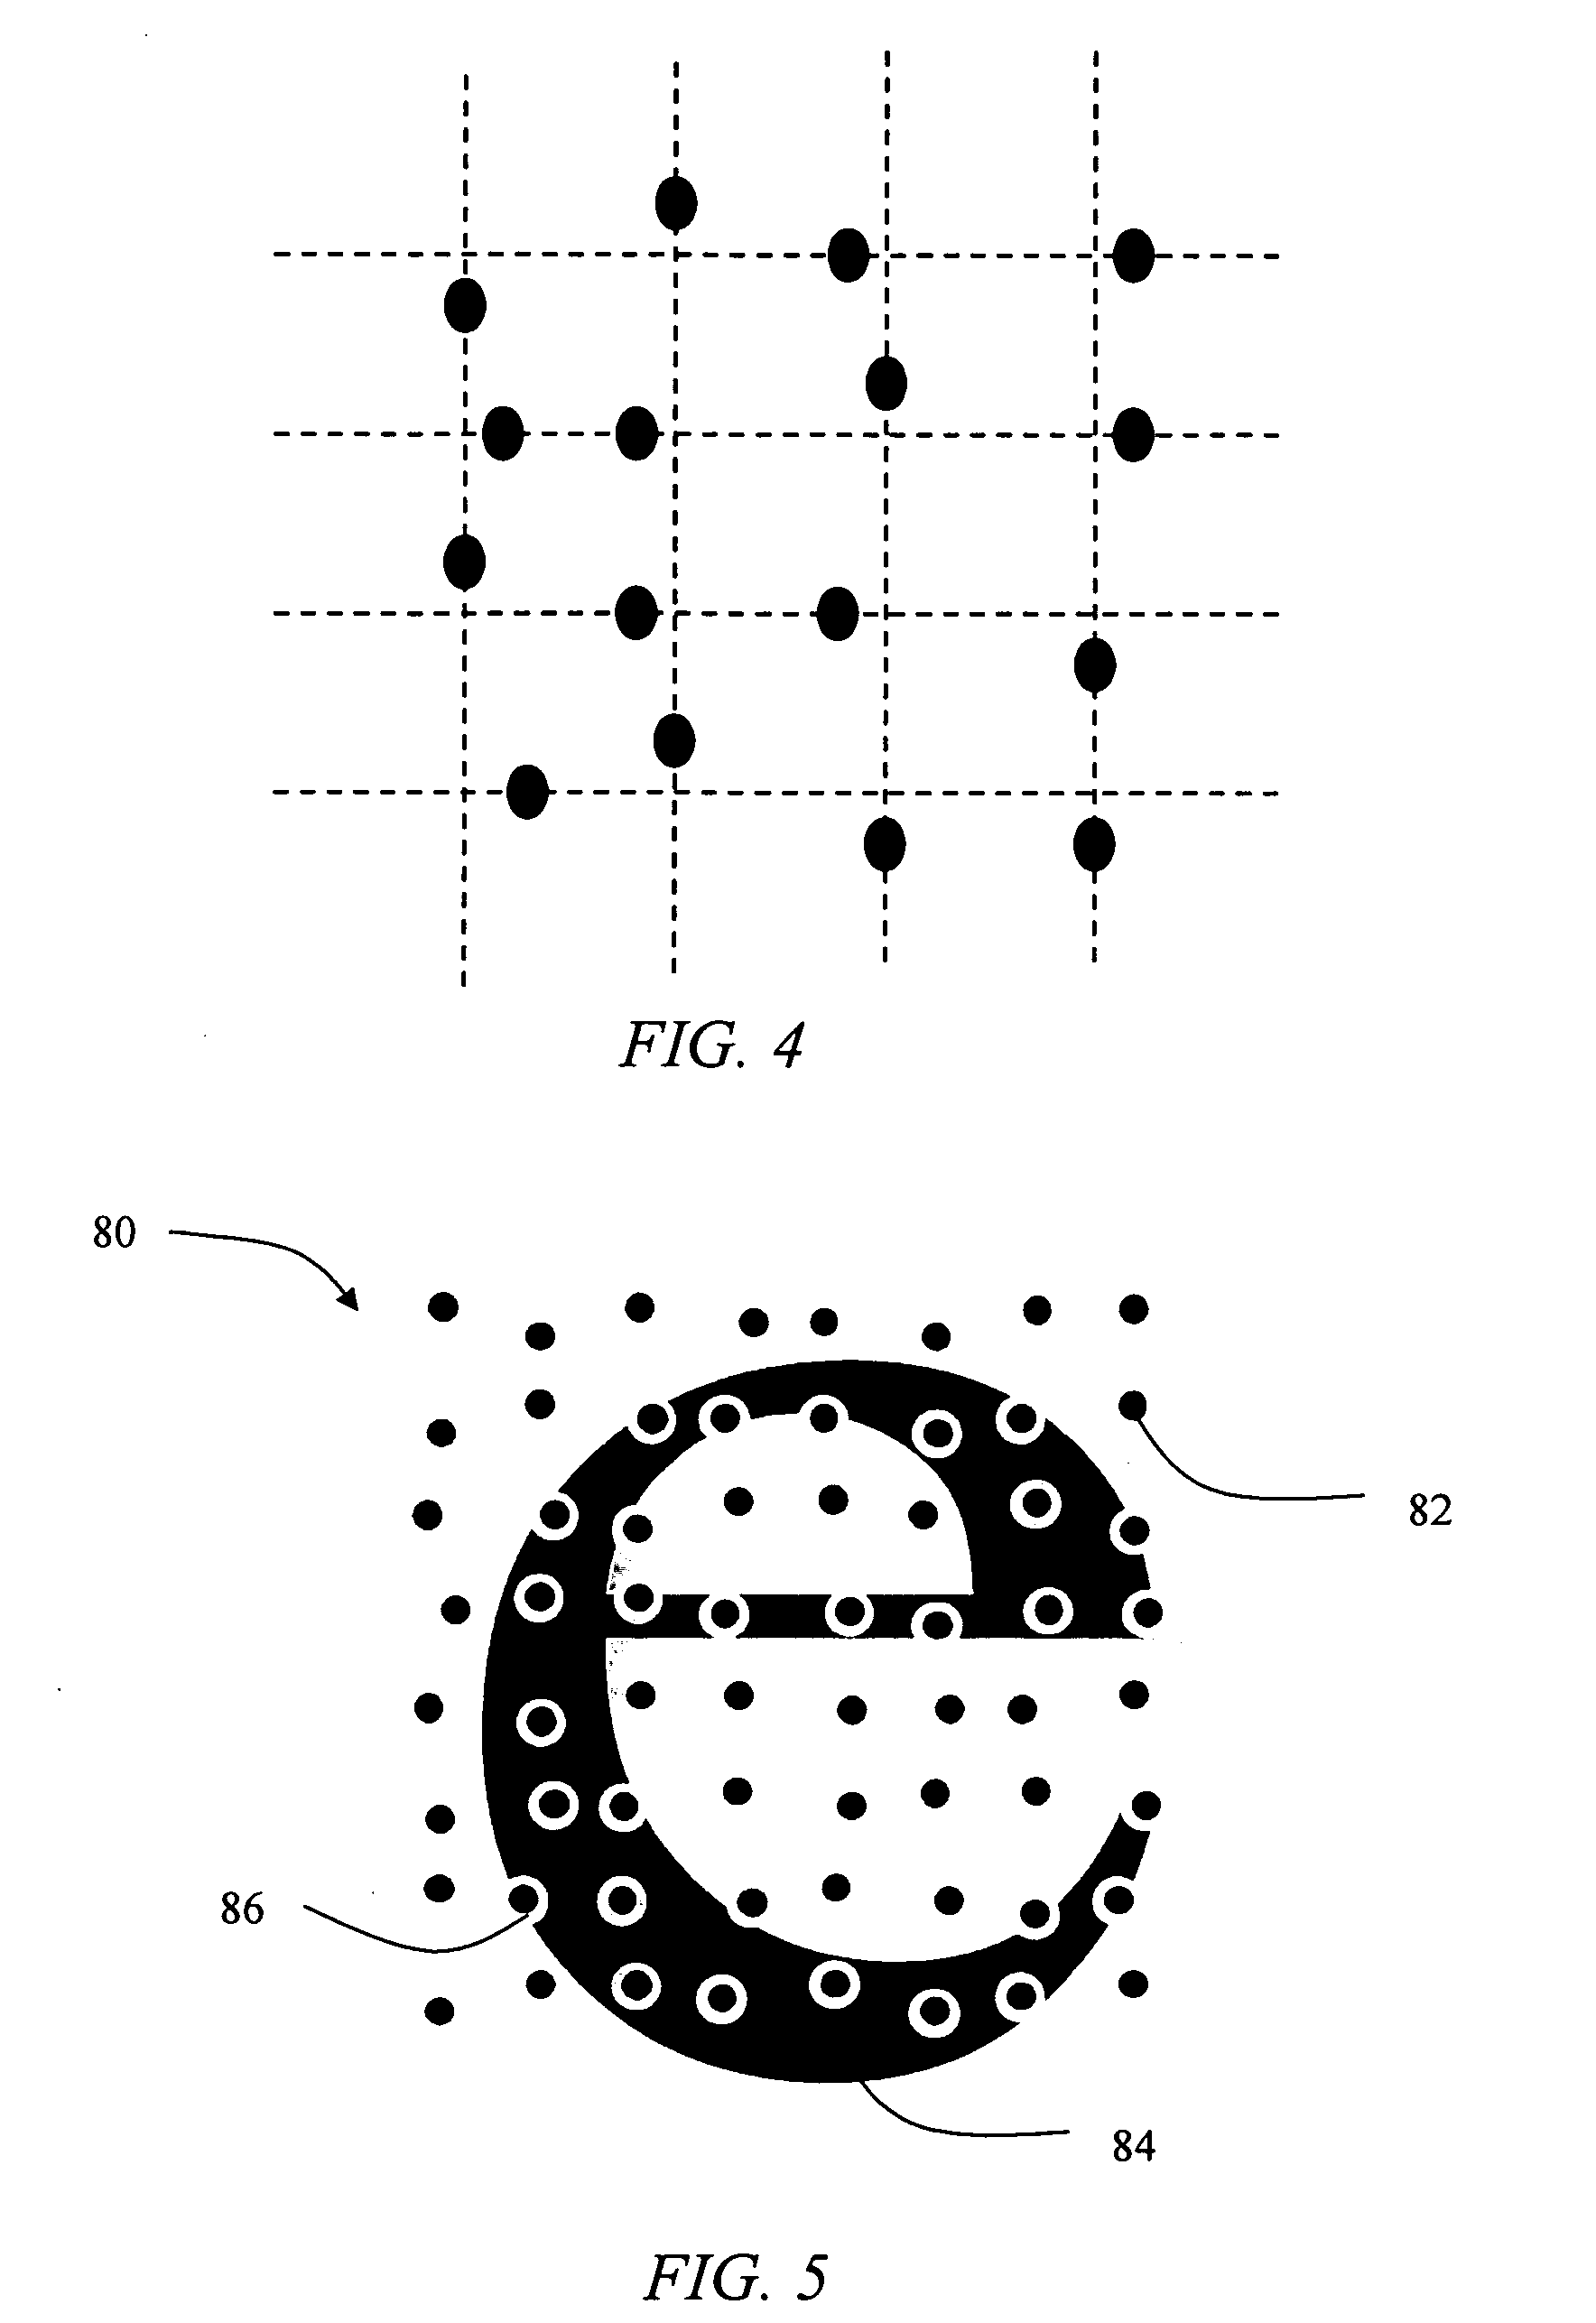 Substrates having a position encoding pattern